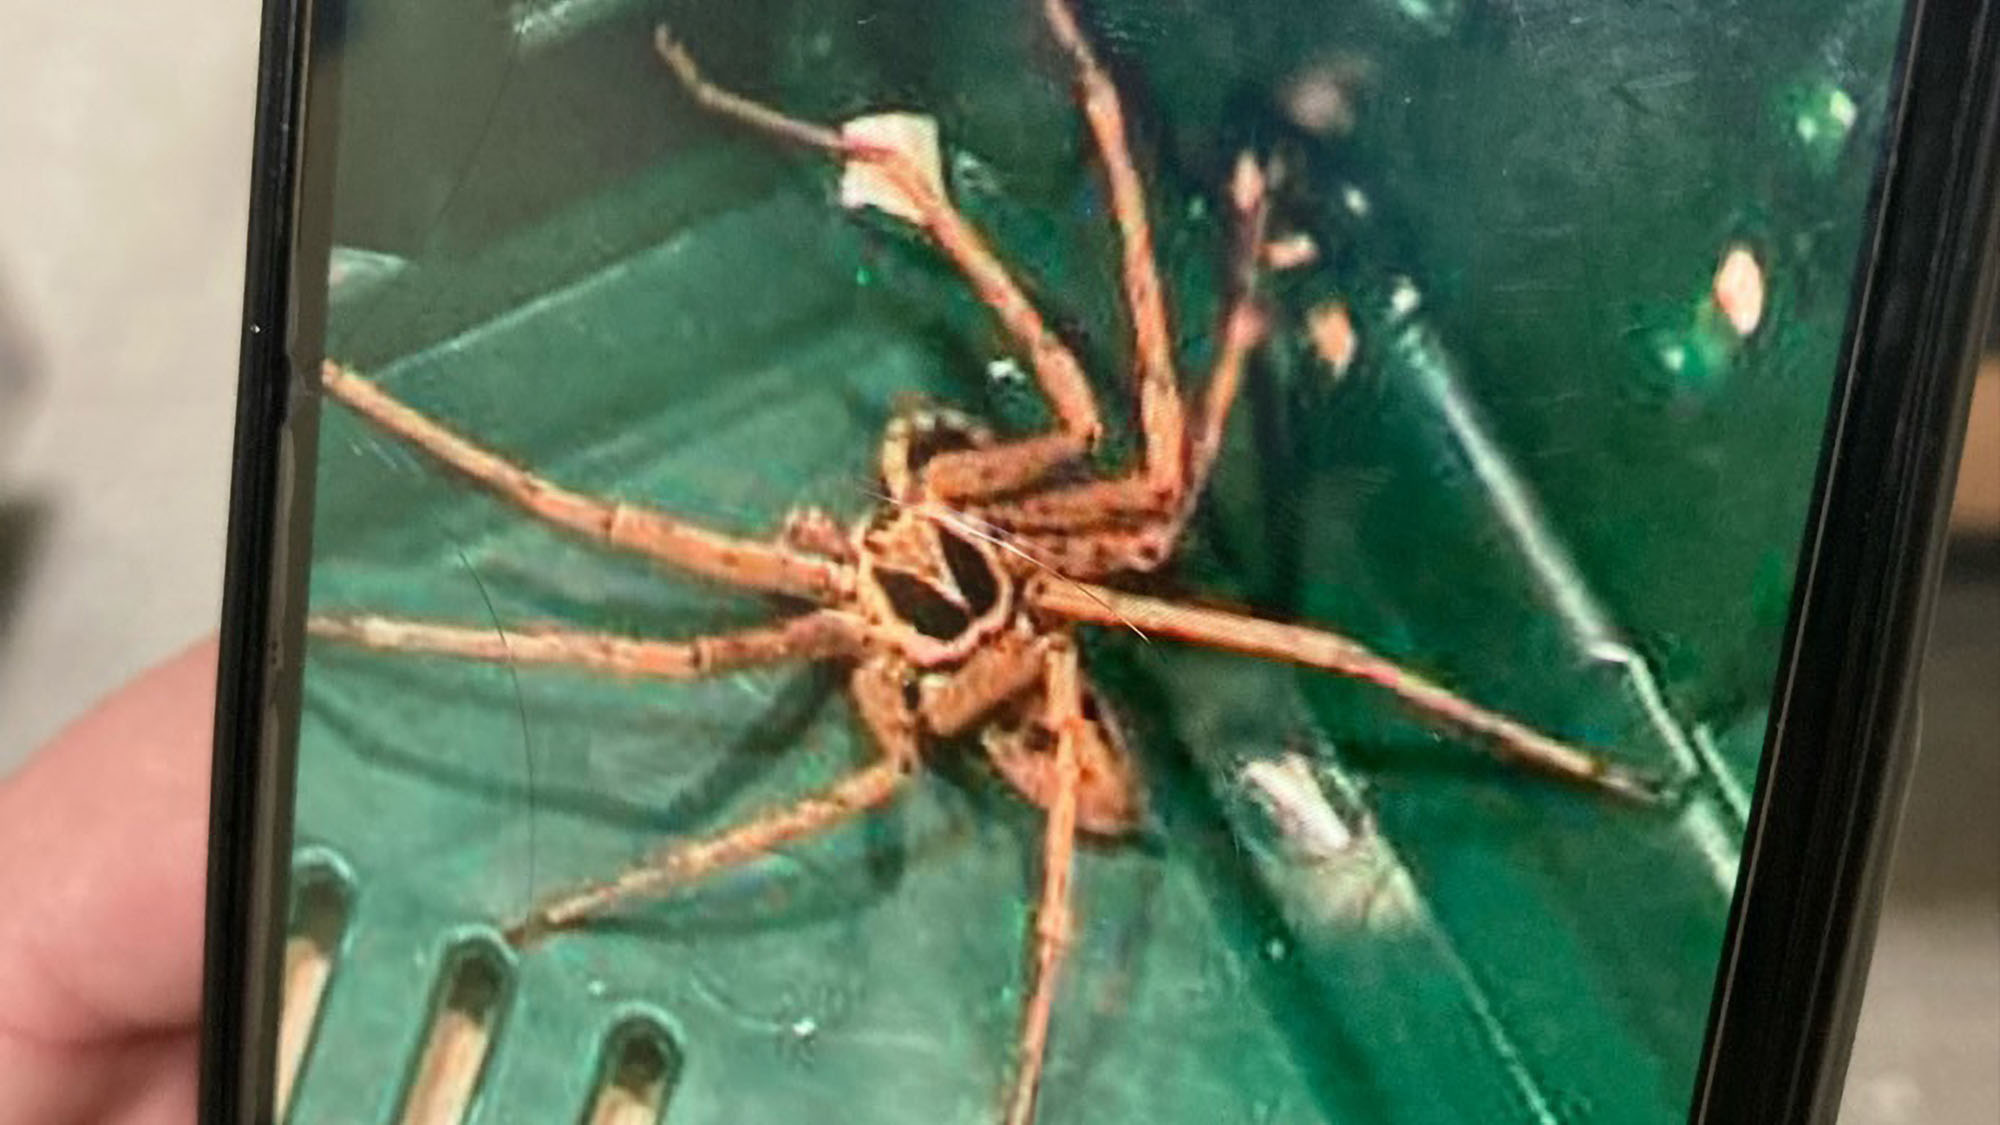 Read more about the article Huge Venomous Tropical Spider With Skull On Its Back Found In Banana Box In Second German Supermarket